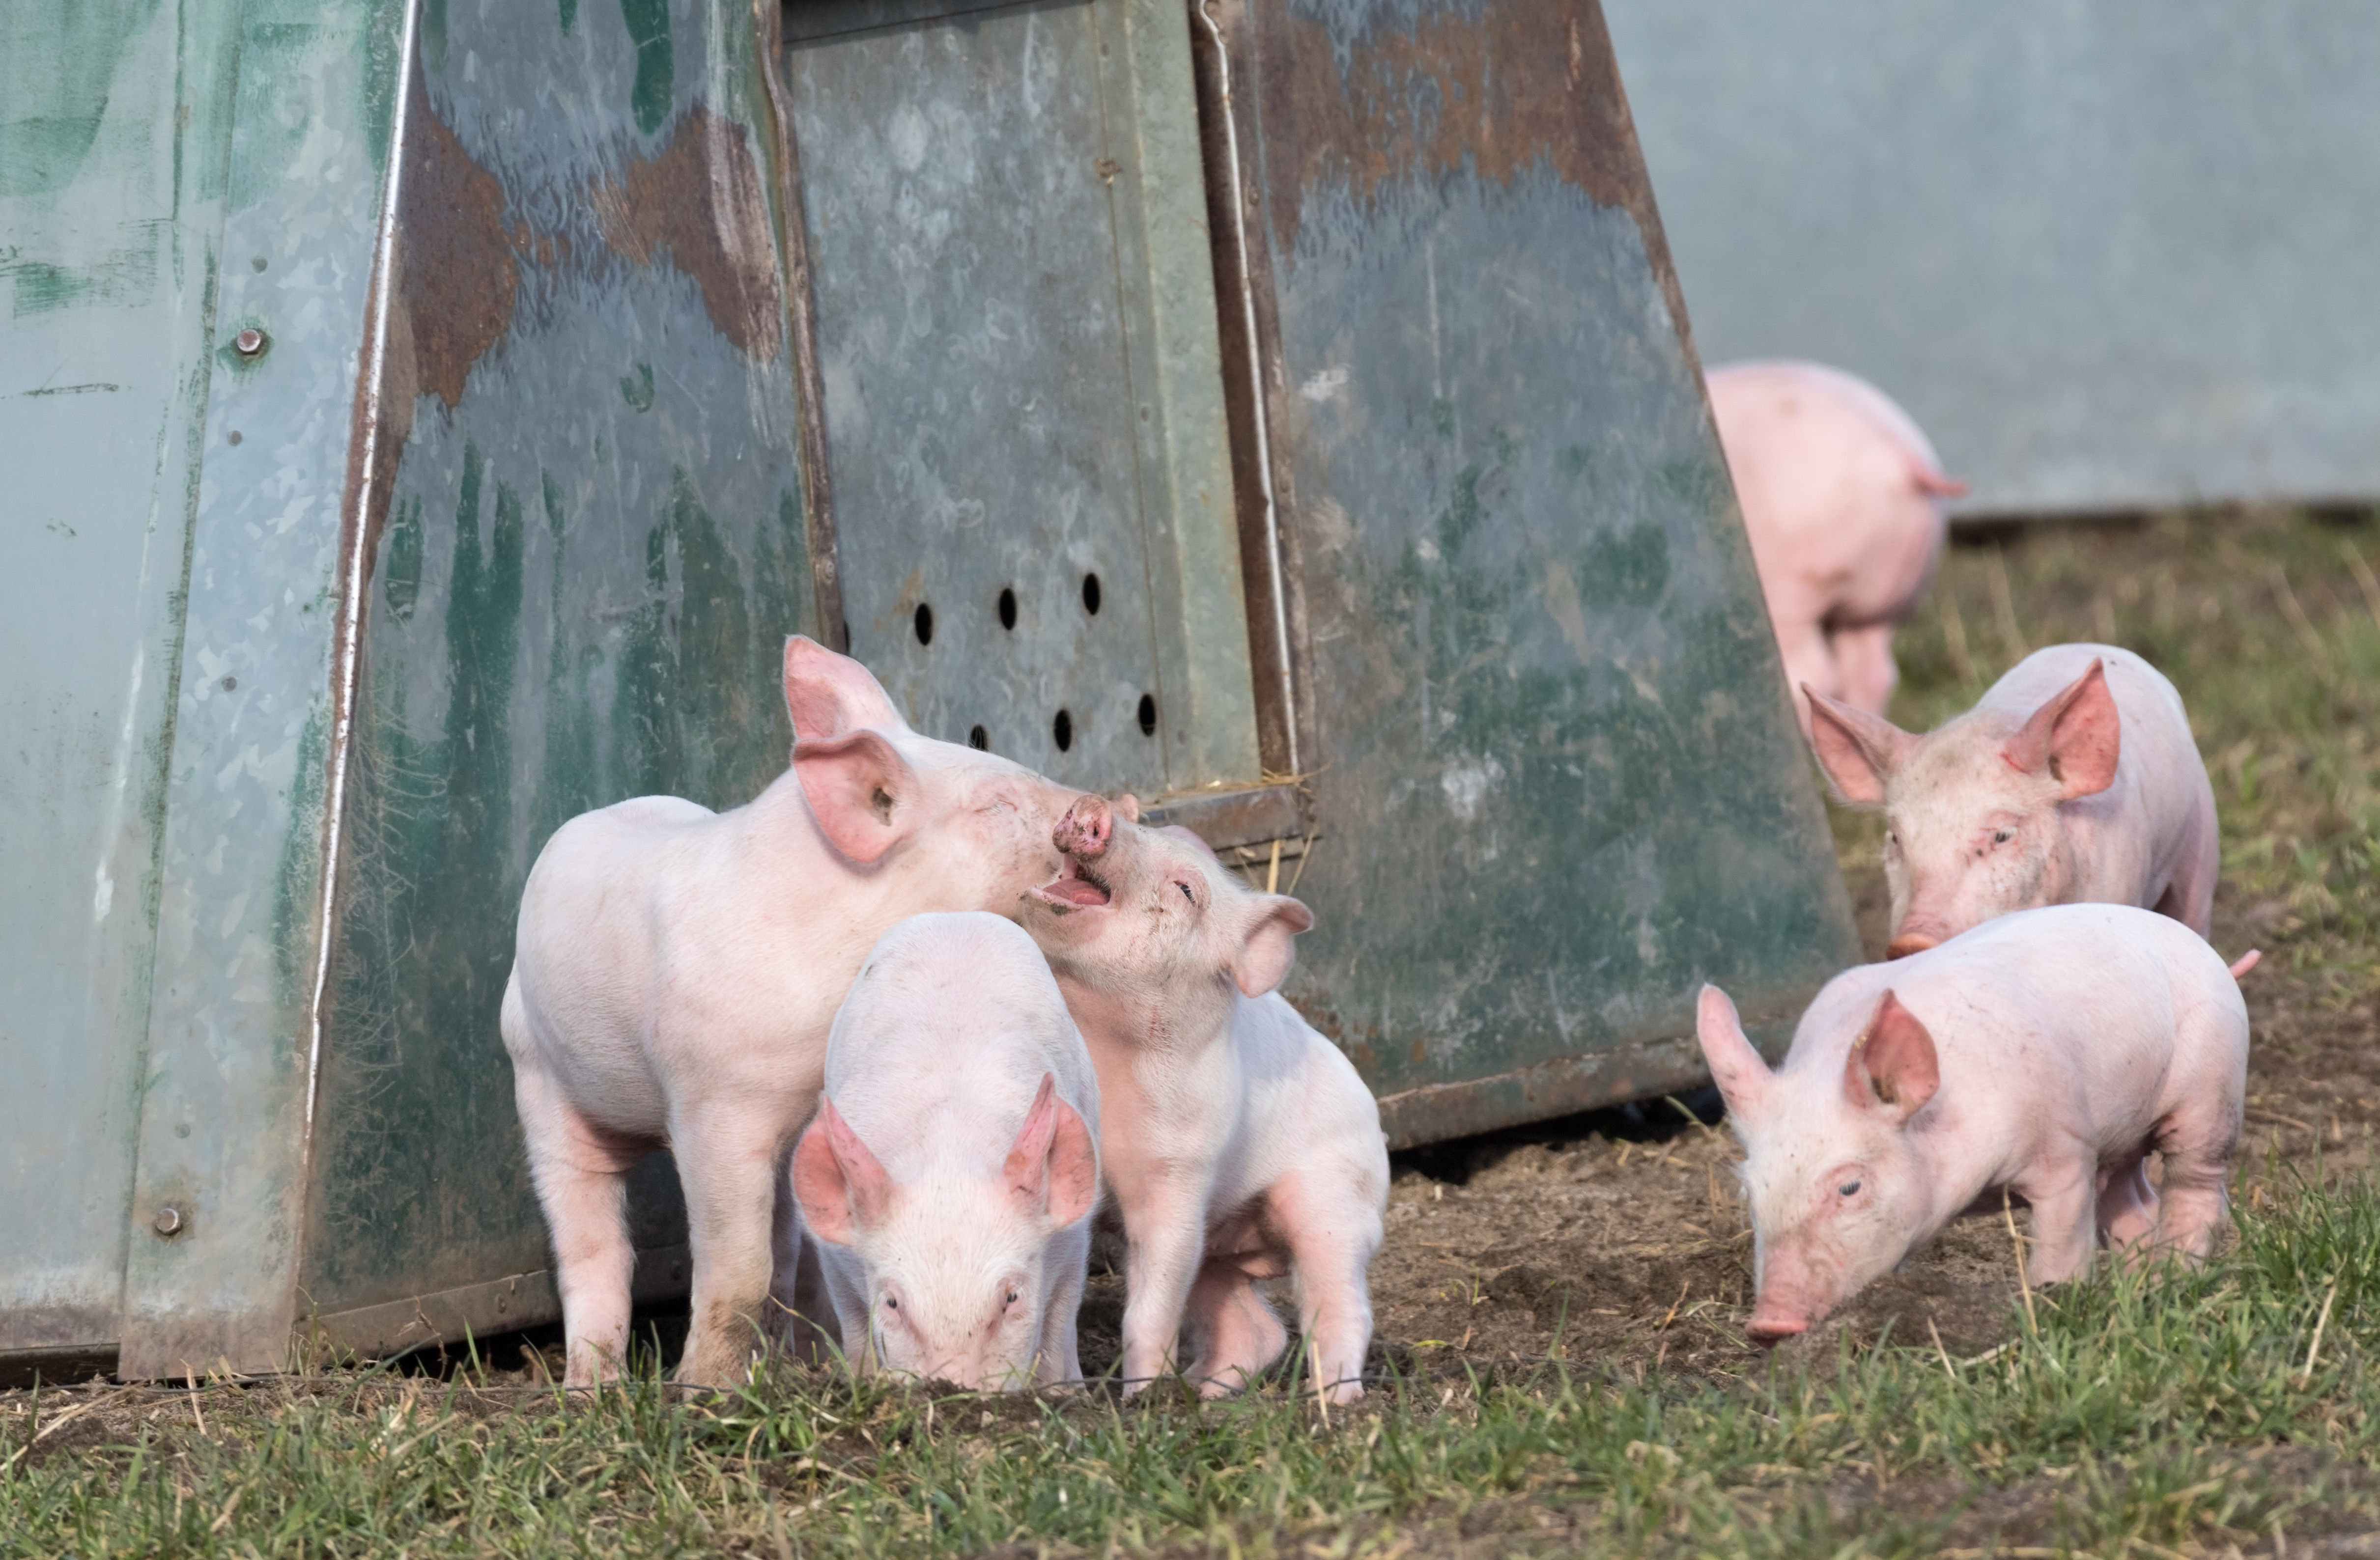 Image for Pre-weaning socialisation with non-littermates in piglets: reduced weaning stress when regrouped with unfamiliar piglets post-weaning?